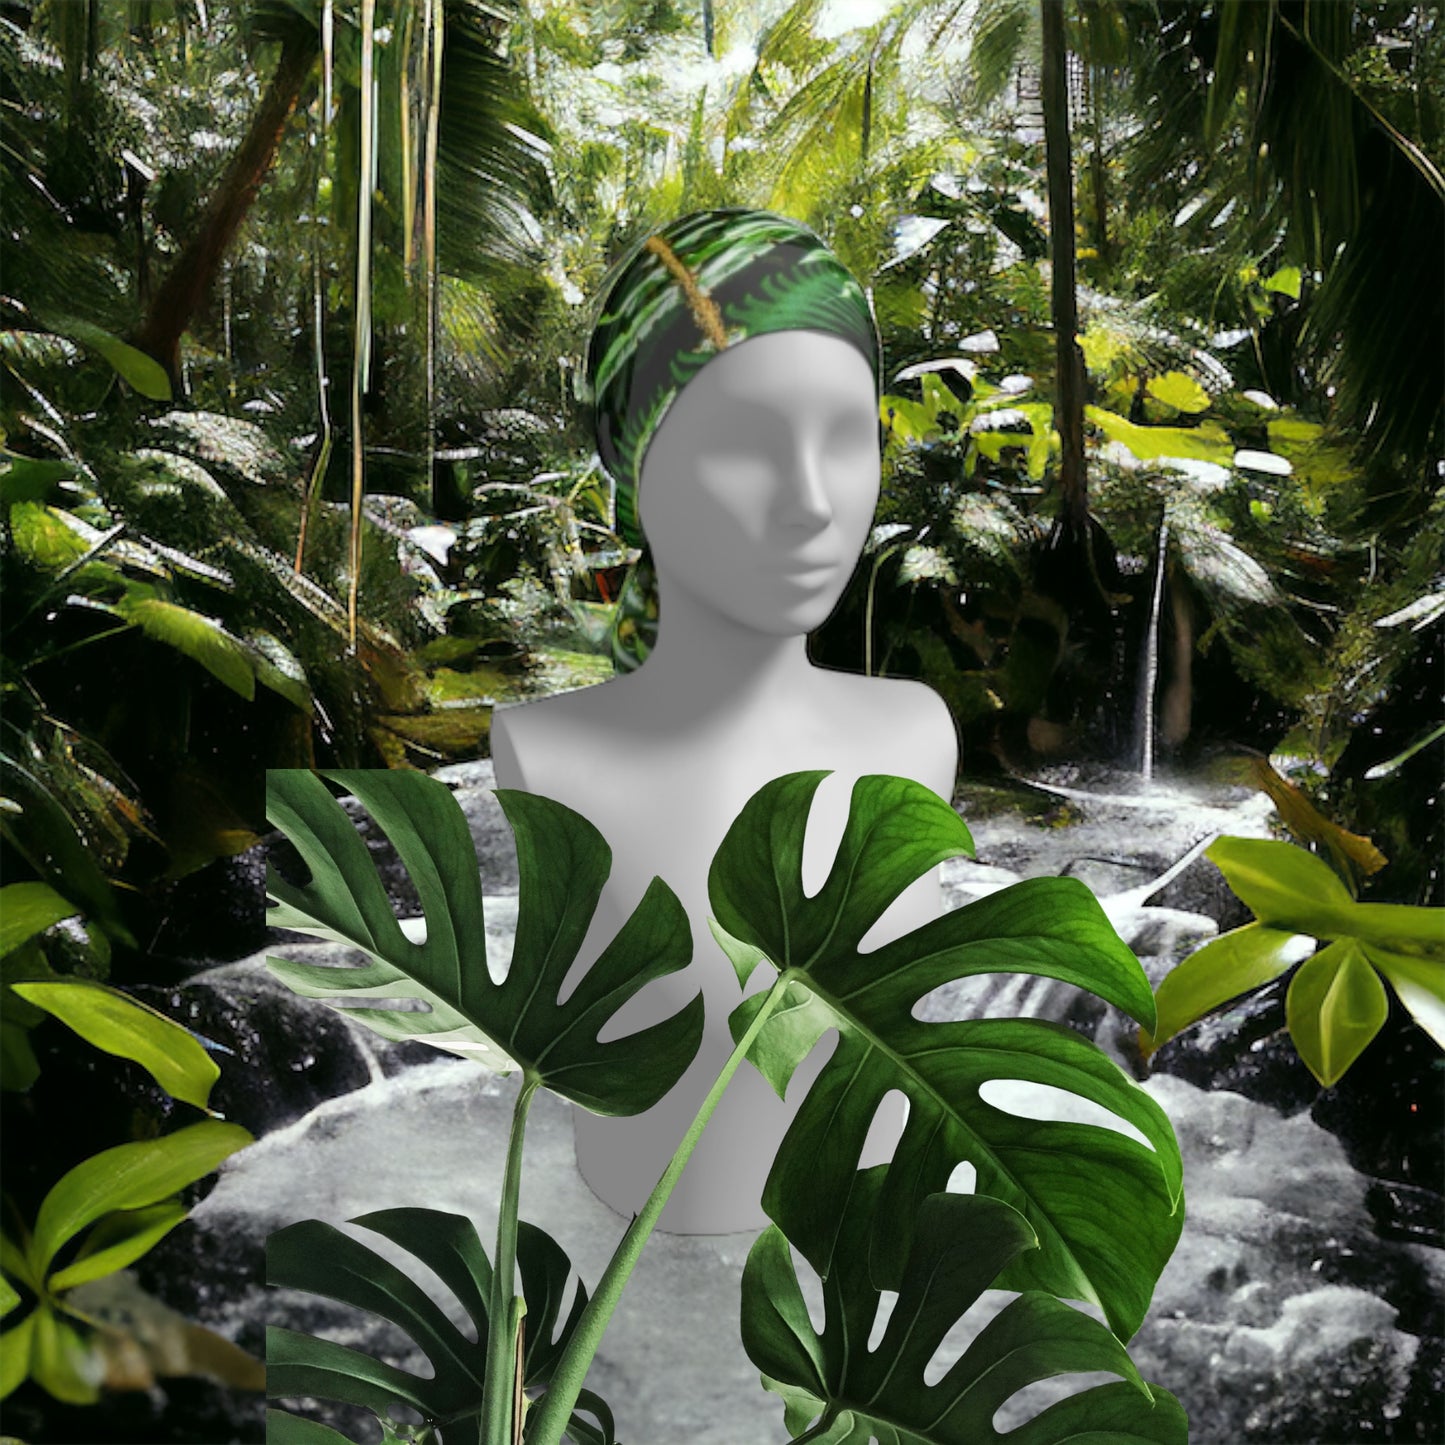 Rainforest long scarf is shown worn as head wrap in the rainforest.